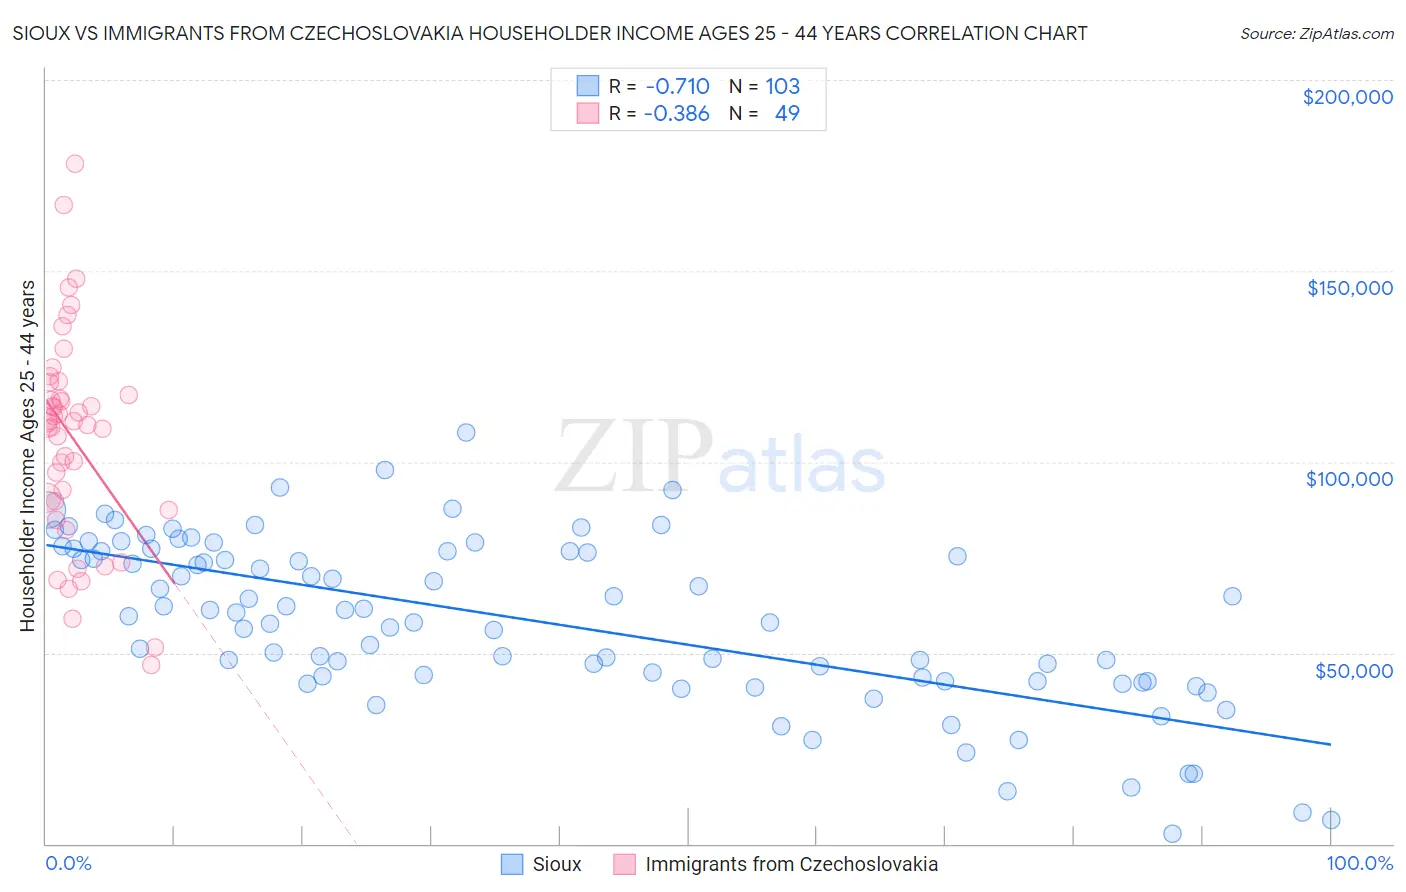 Sioux vs Immigrants from Czechoslovakia Householder Income Ages 25 - 44 years